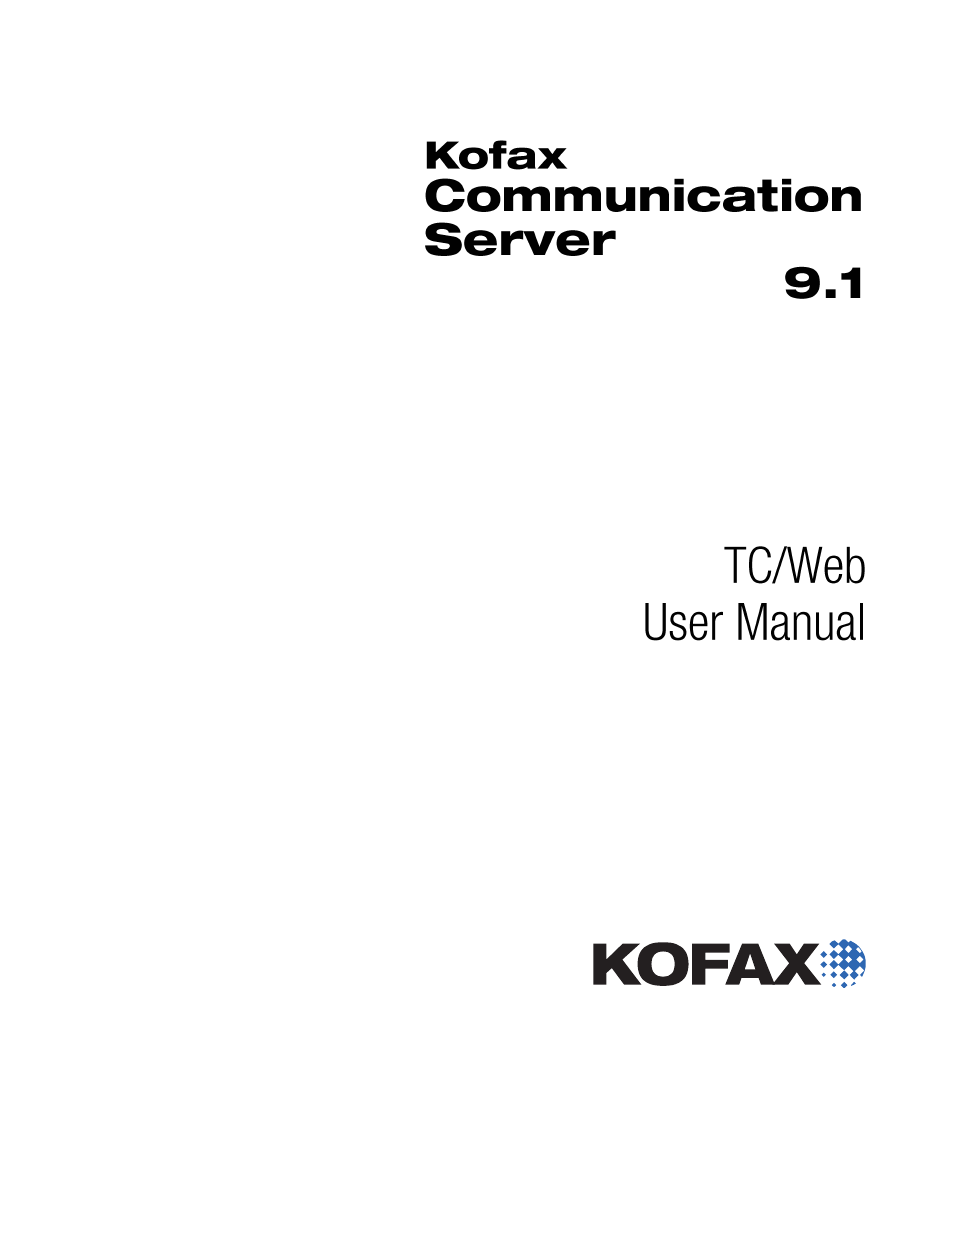 Kofax Communication Server 9.1 User Manual | 85 pages